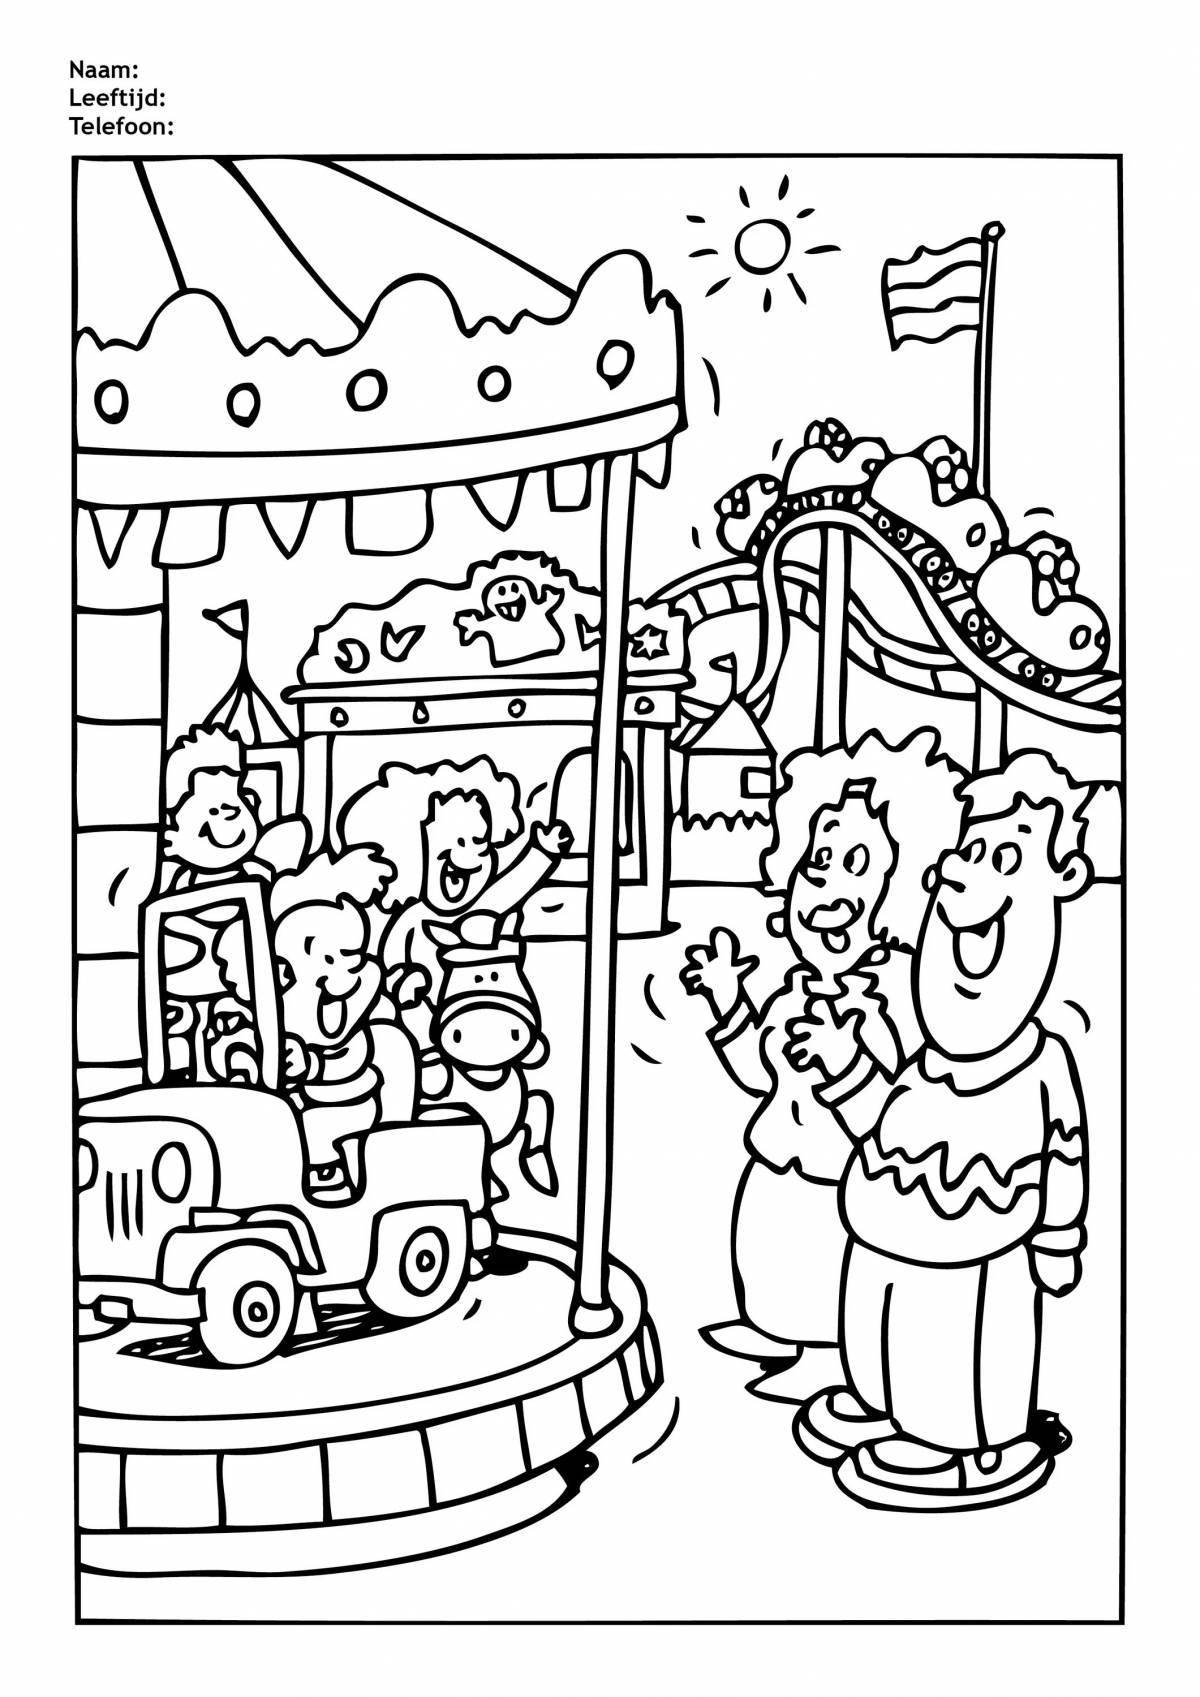 Coloring book for exciting amusement park